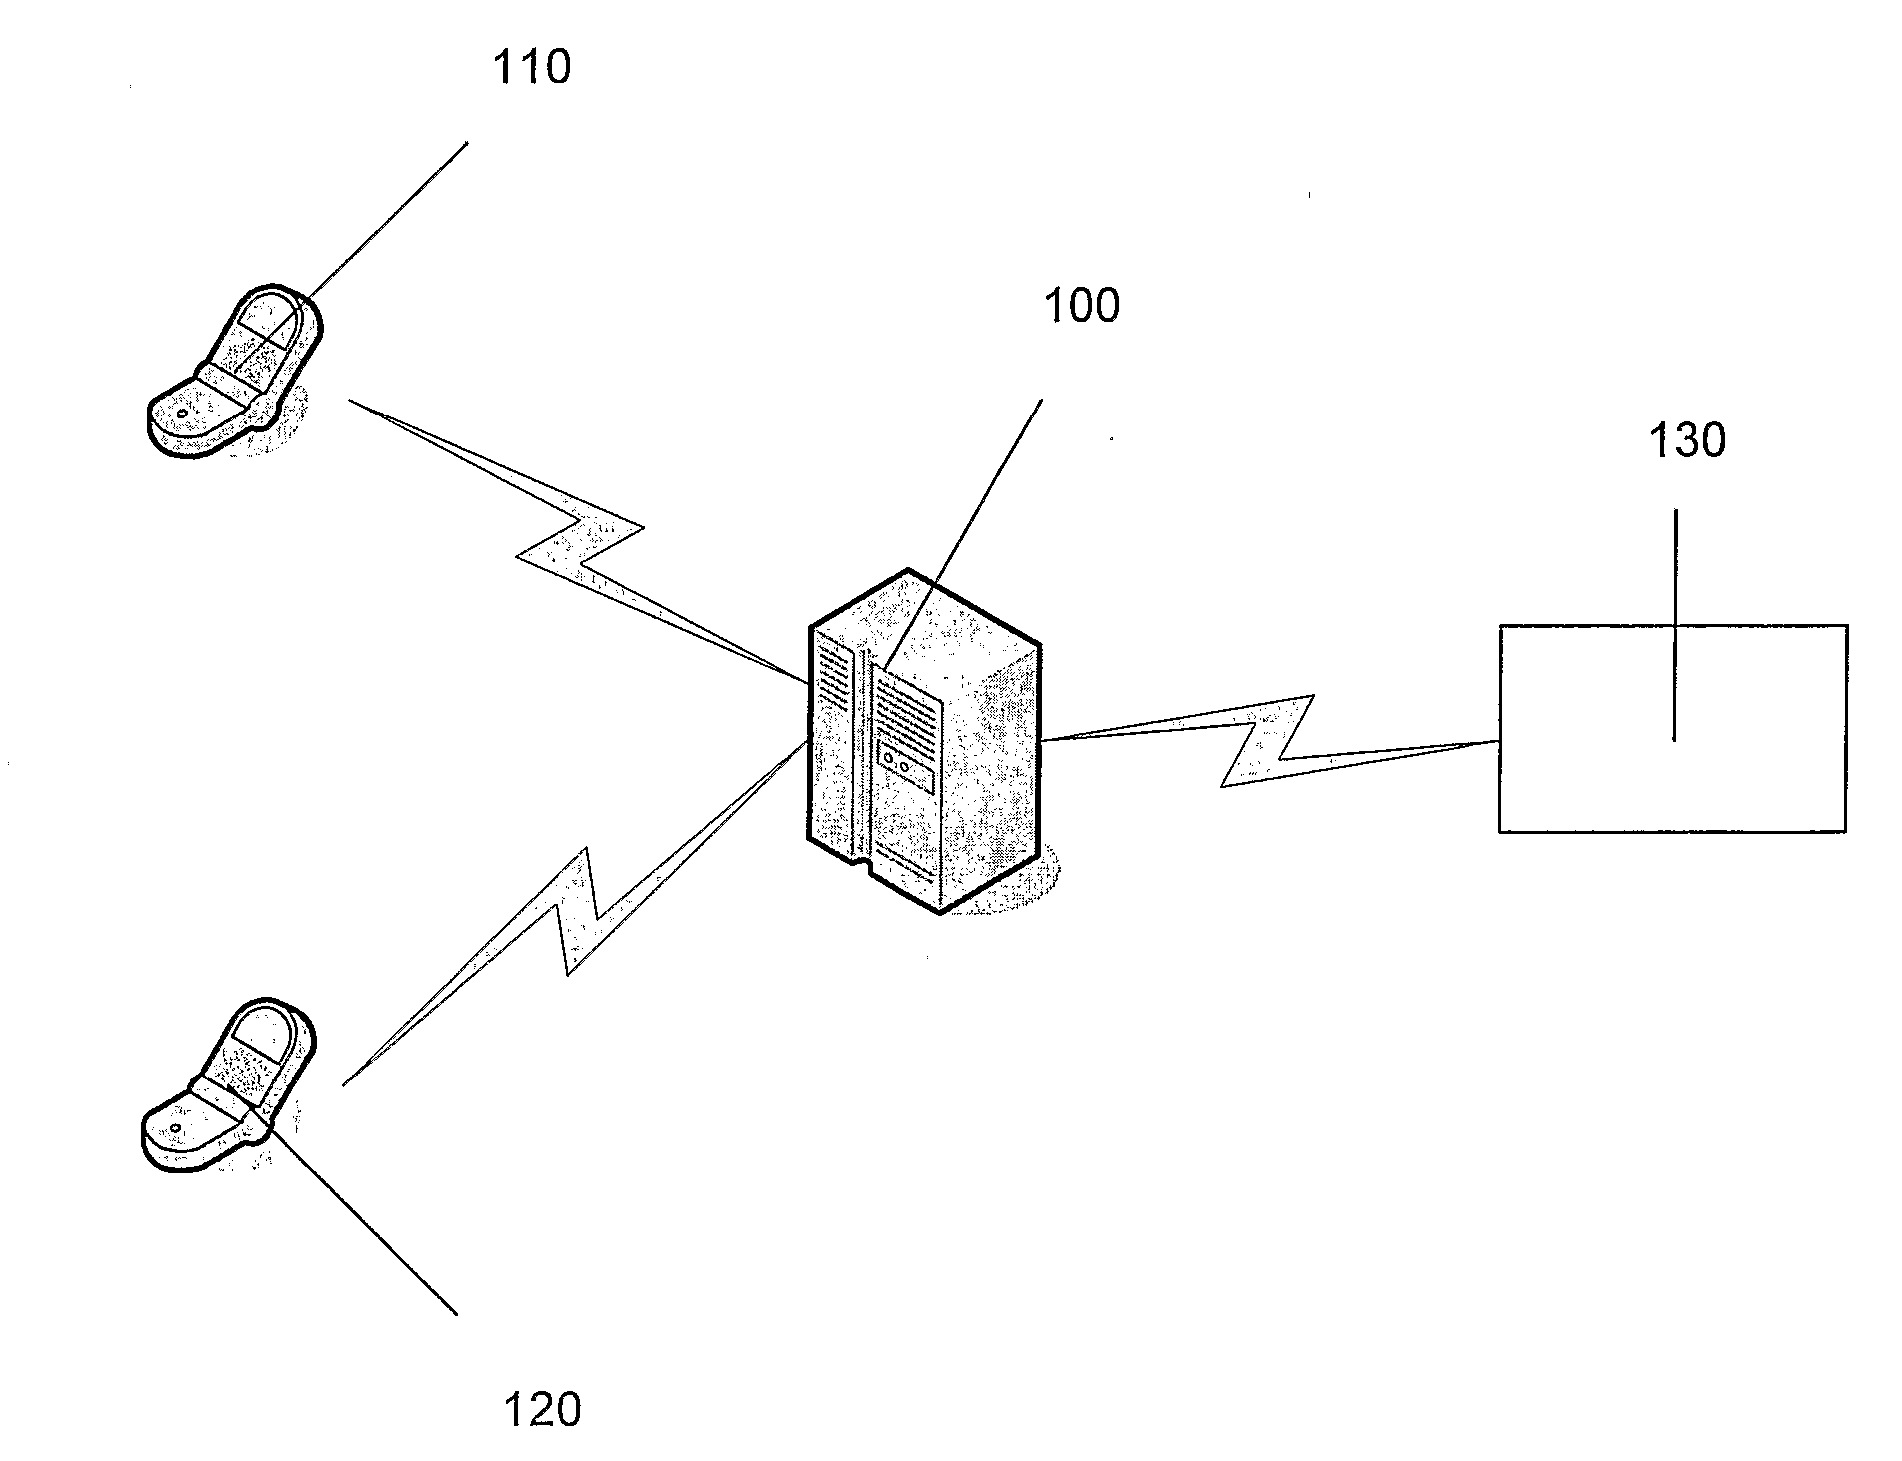 Method and System for Extending the Use and/or Application of Messaging Systems